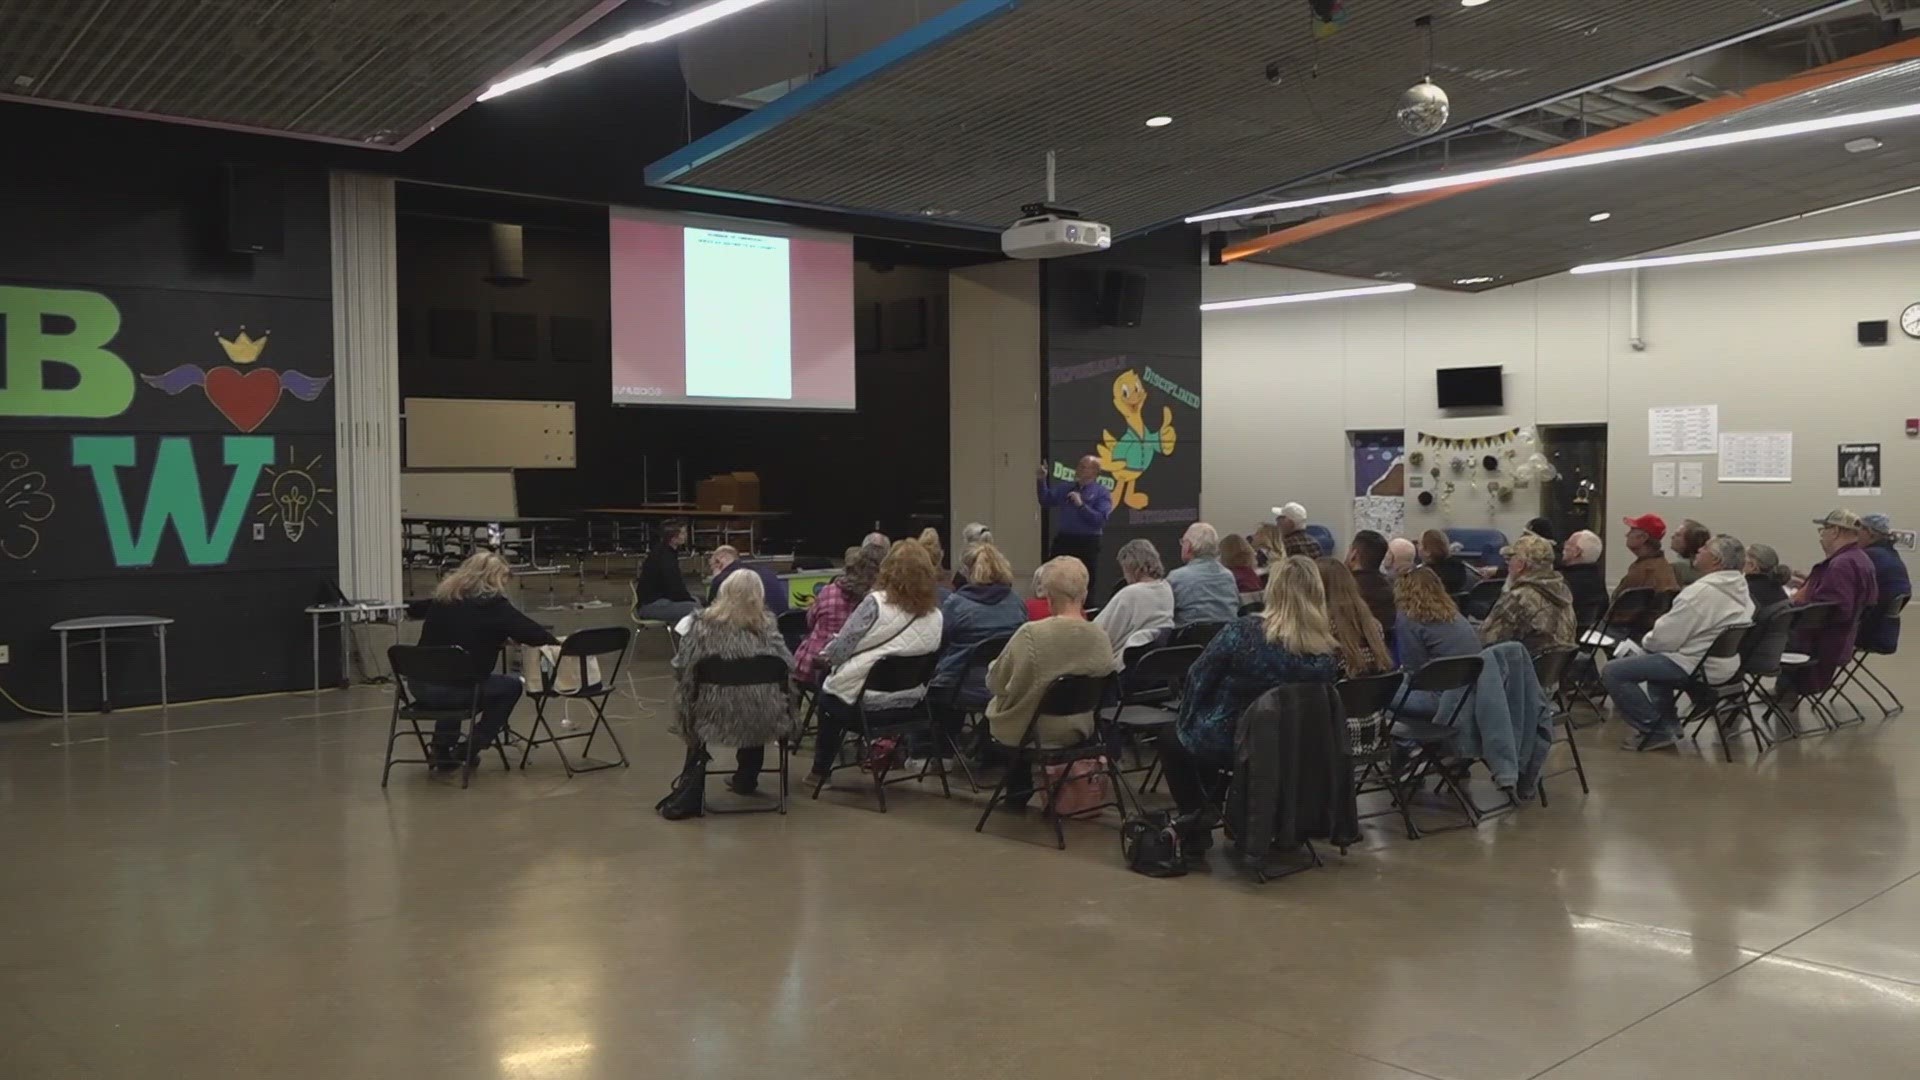 At a town hall meeting in Odessa Friday night, city officials talked about how limited the emergency services in West Odessa are and how they want to change that.